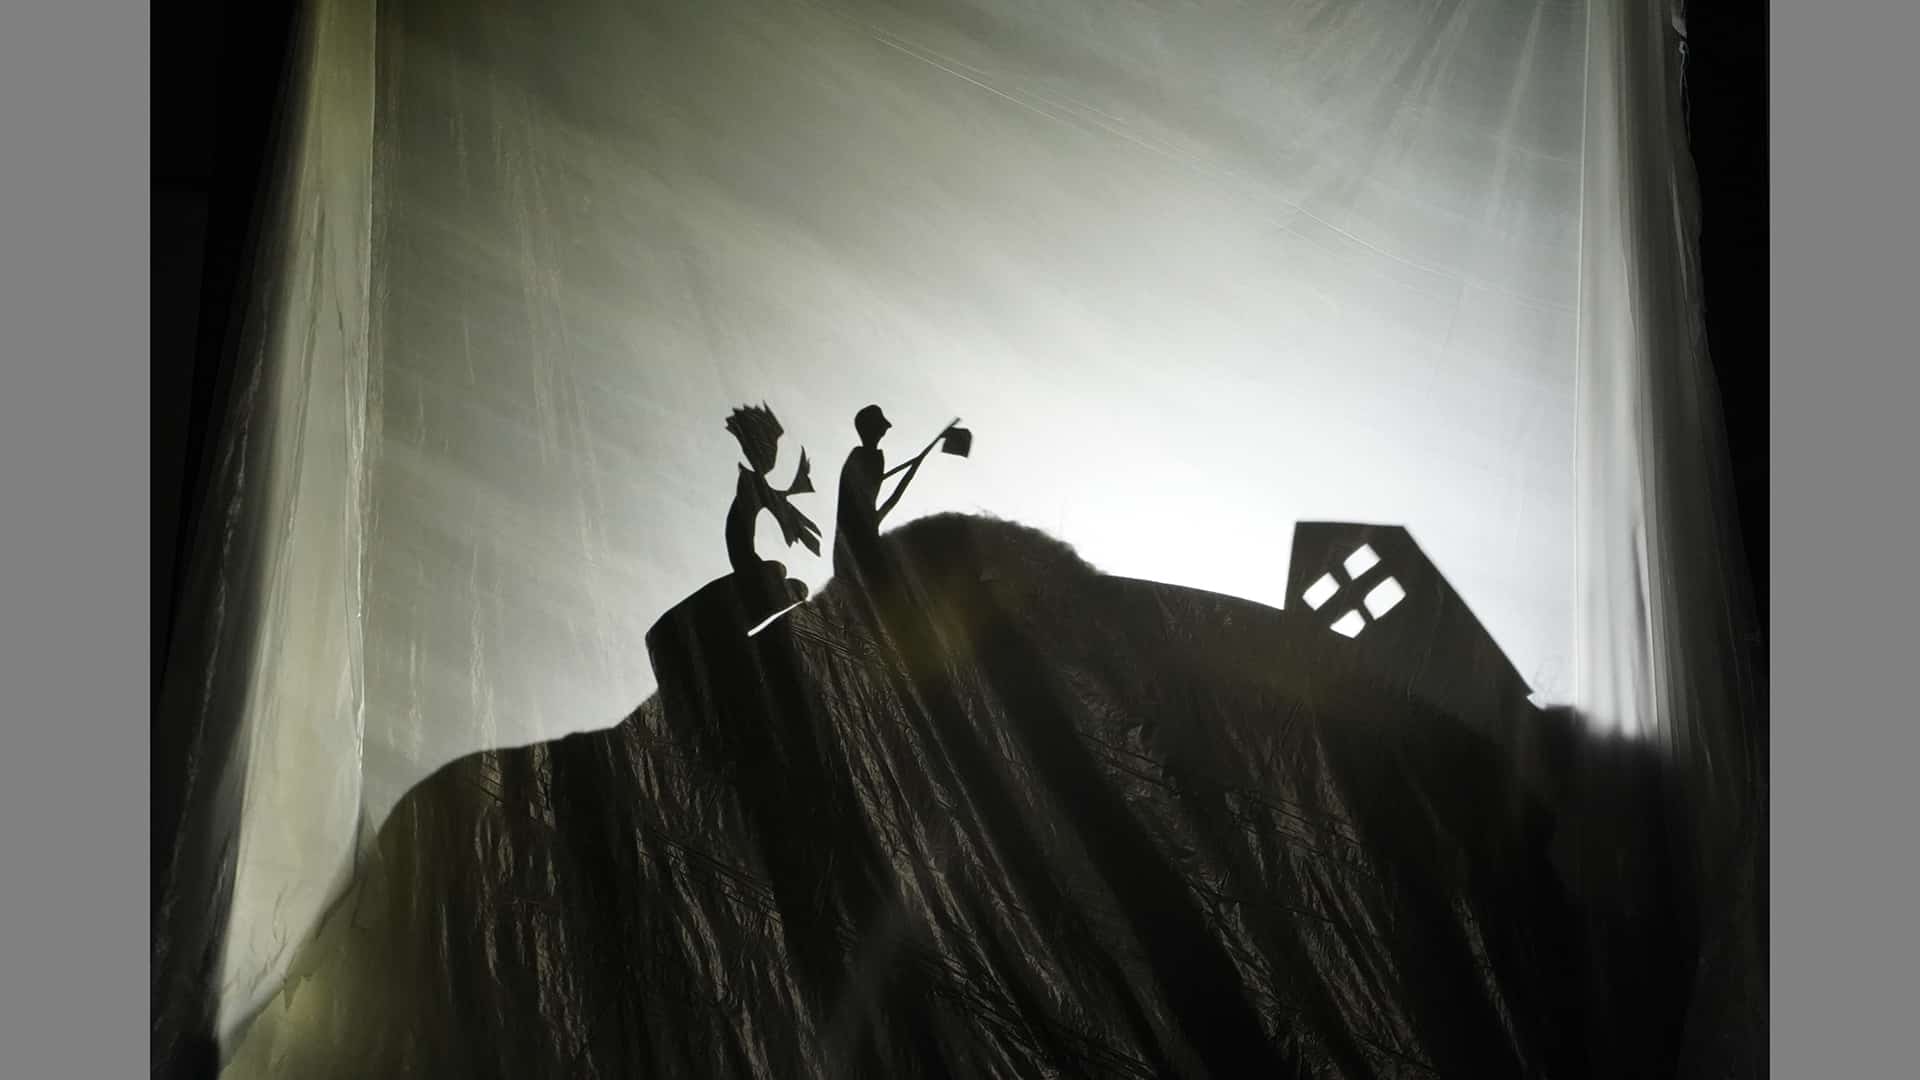 Shadowpuppet scene with two figures climbing a hill towards a building